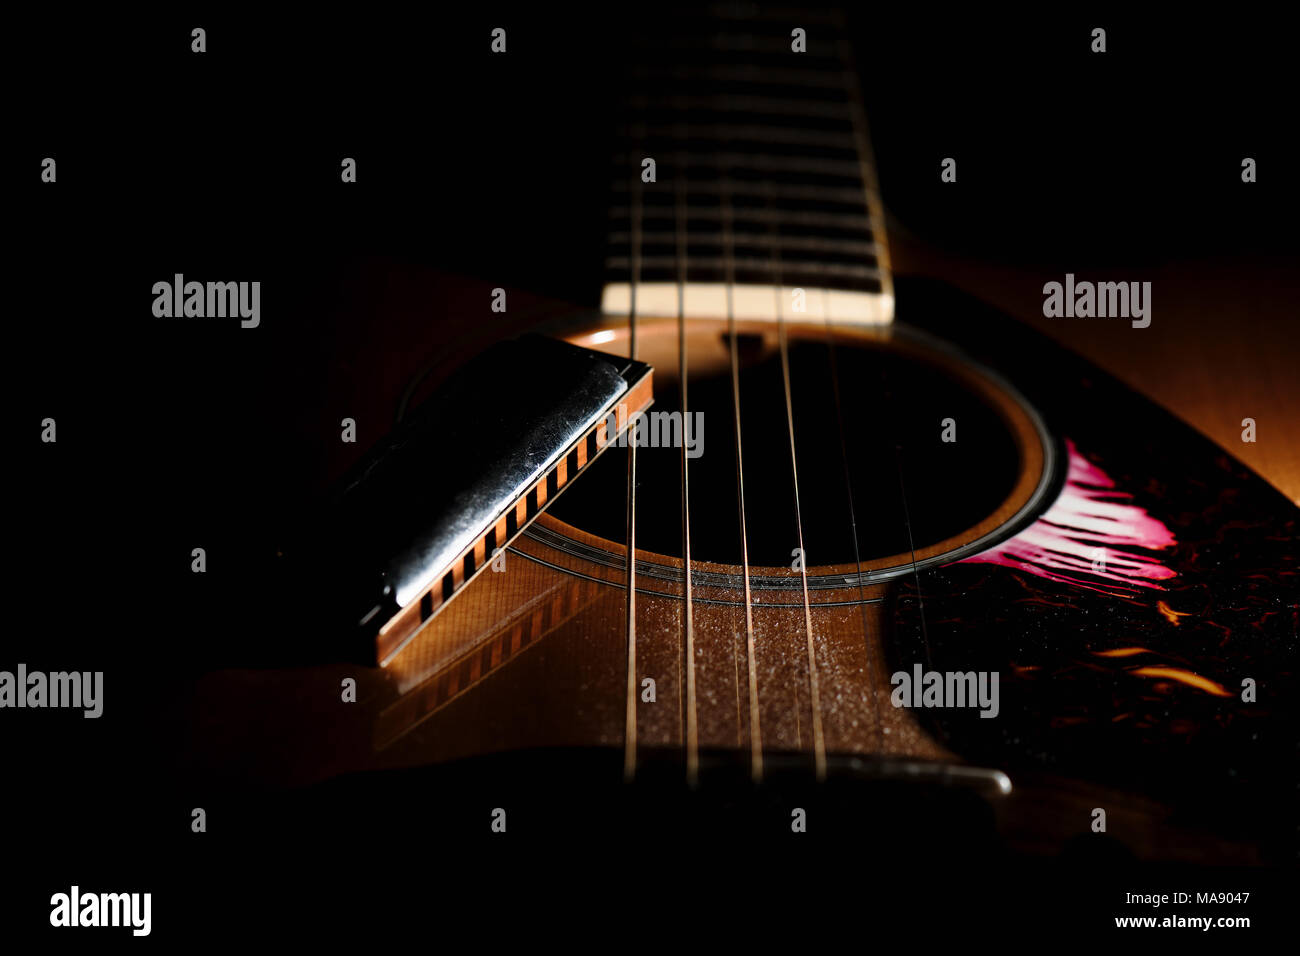 Detail of a blues harmonica near the sound hole of an acoustic guitar. Stock Photo